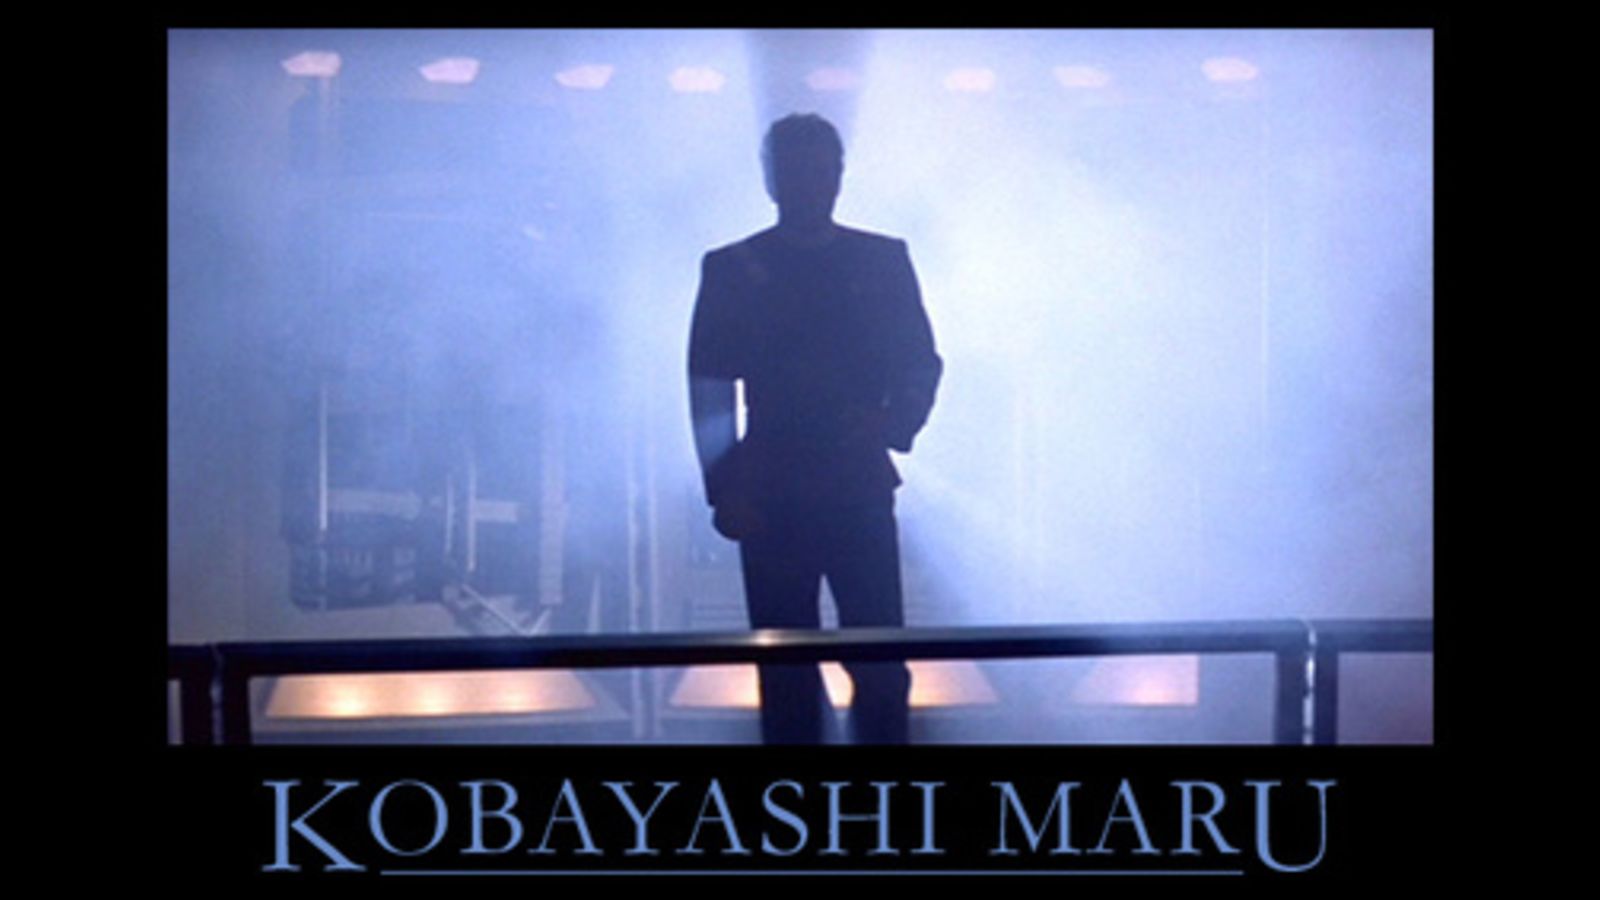 What the Kobayashi Maru is not